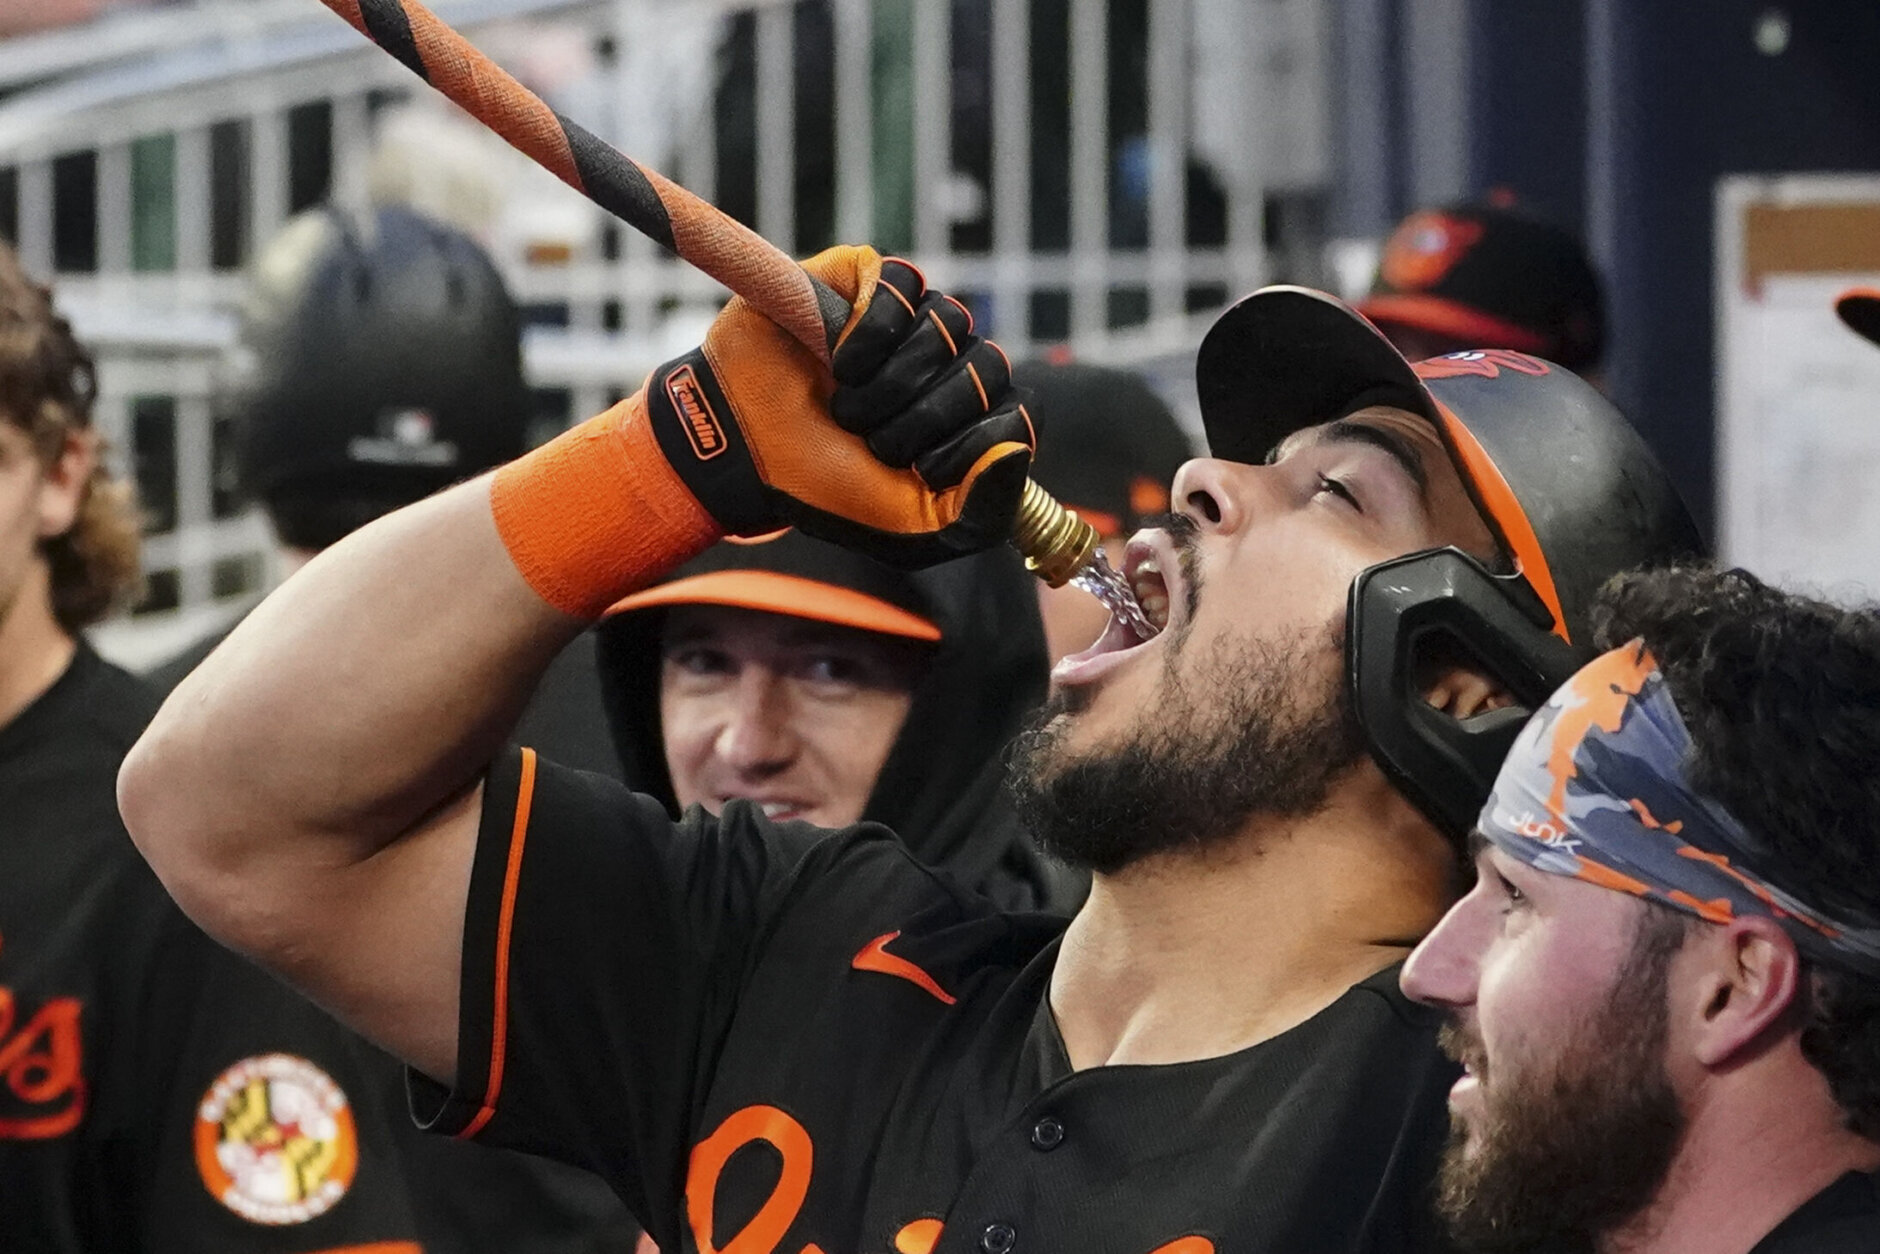 Baltimore Orioles right fielder Anthony Santander (25) drinks from a hose as he celebrates a home run in the fourth inning of a baseball game against the Atlanta Braves Friday, May 5, 2023, in Atlanta. (AP Photo/John Bazemore)